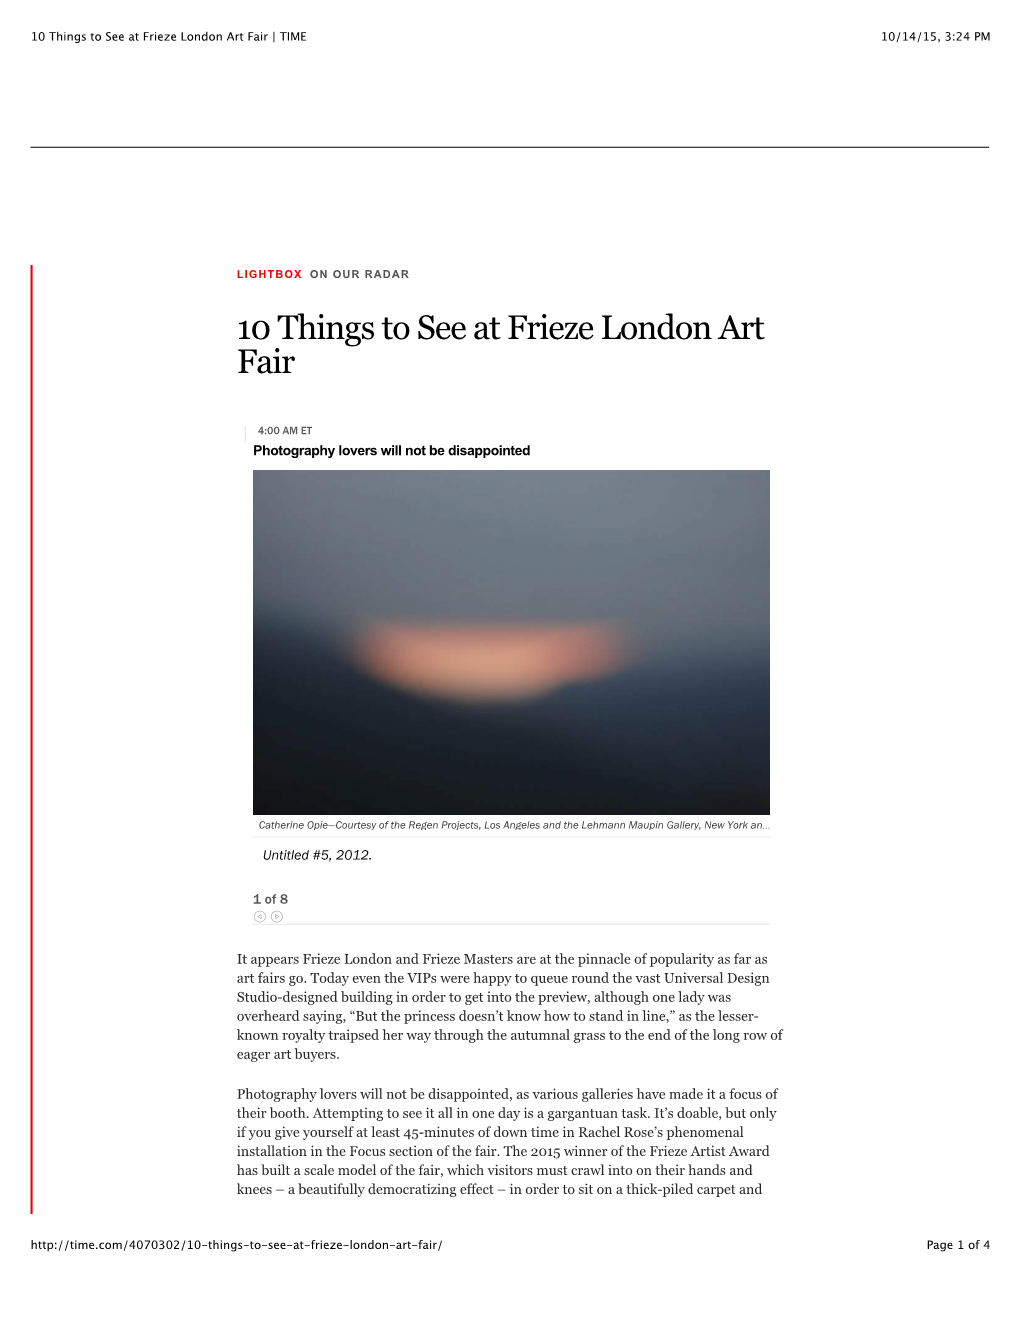 10 Things to See at Frieze London Art Fair | TIME 10/14/15, 3:24 PM